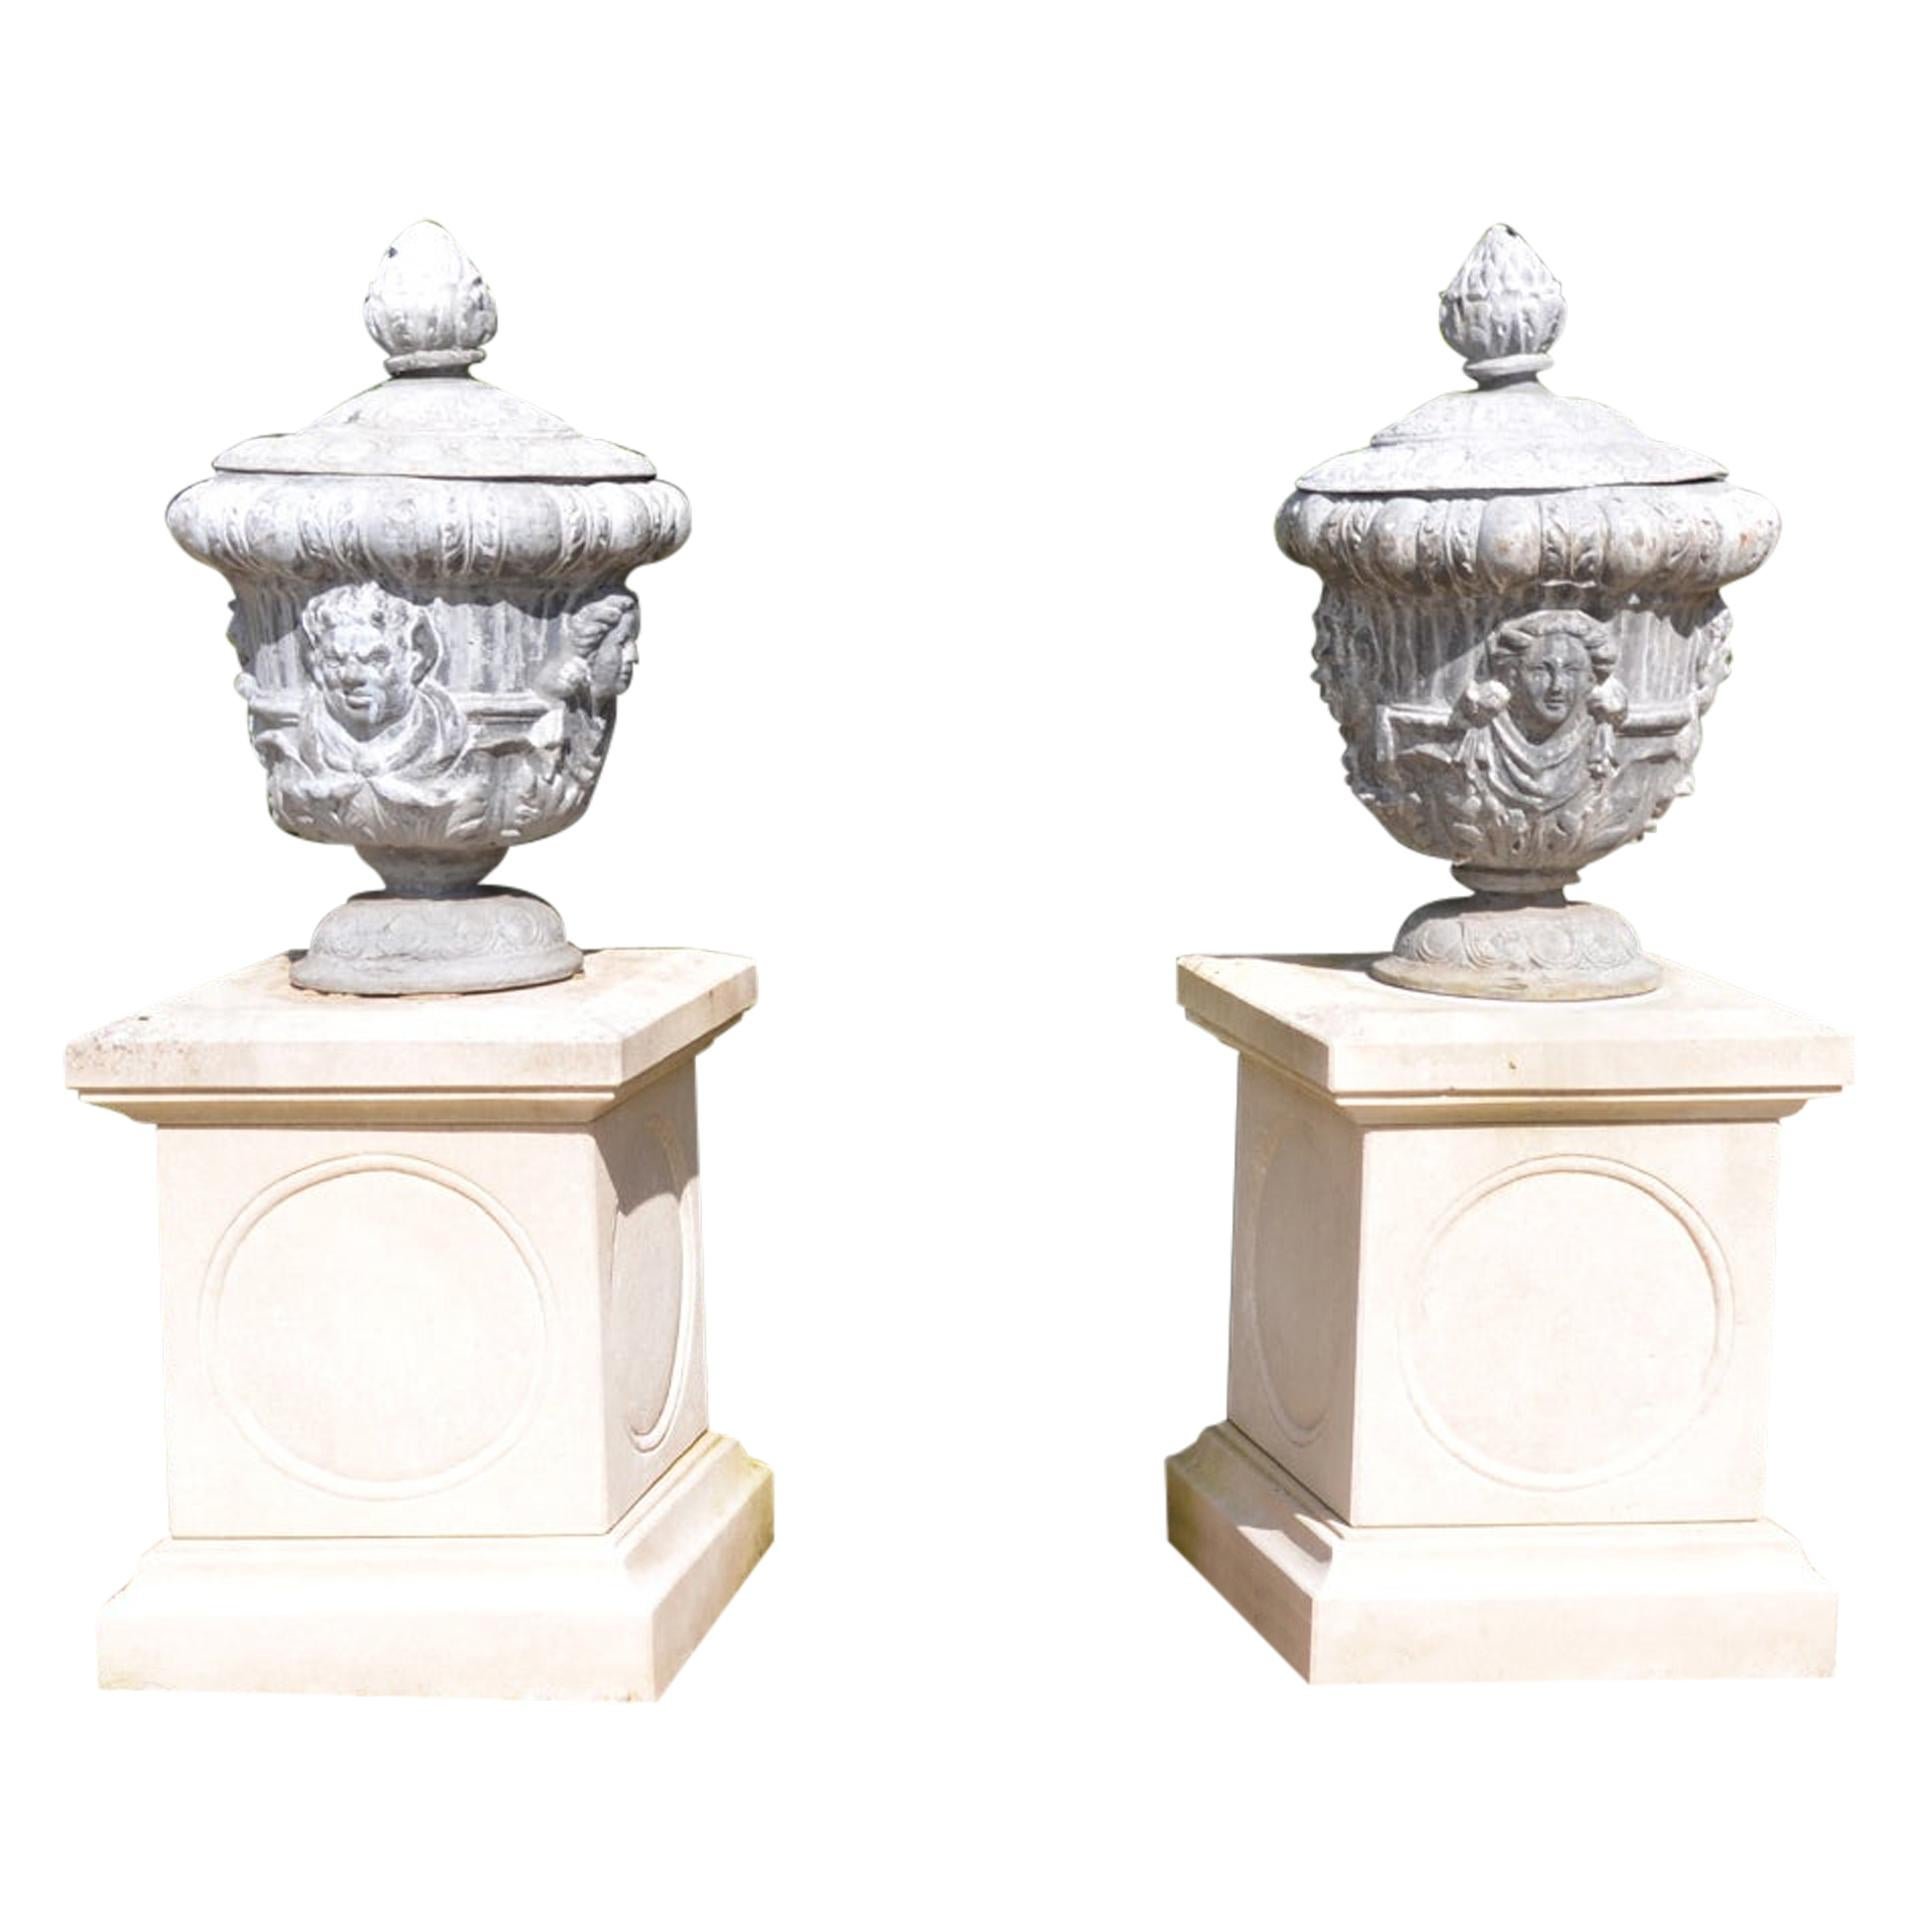 Pair of Mid-20th Century Lead Finial Urns For Sale